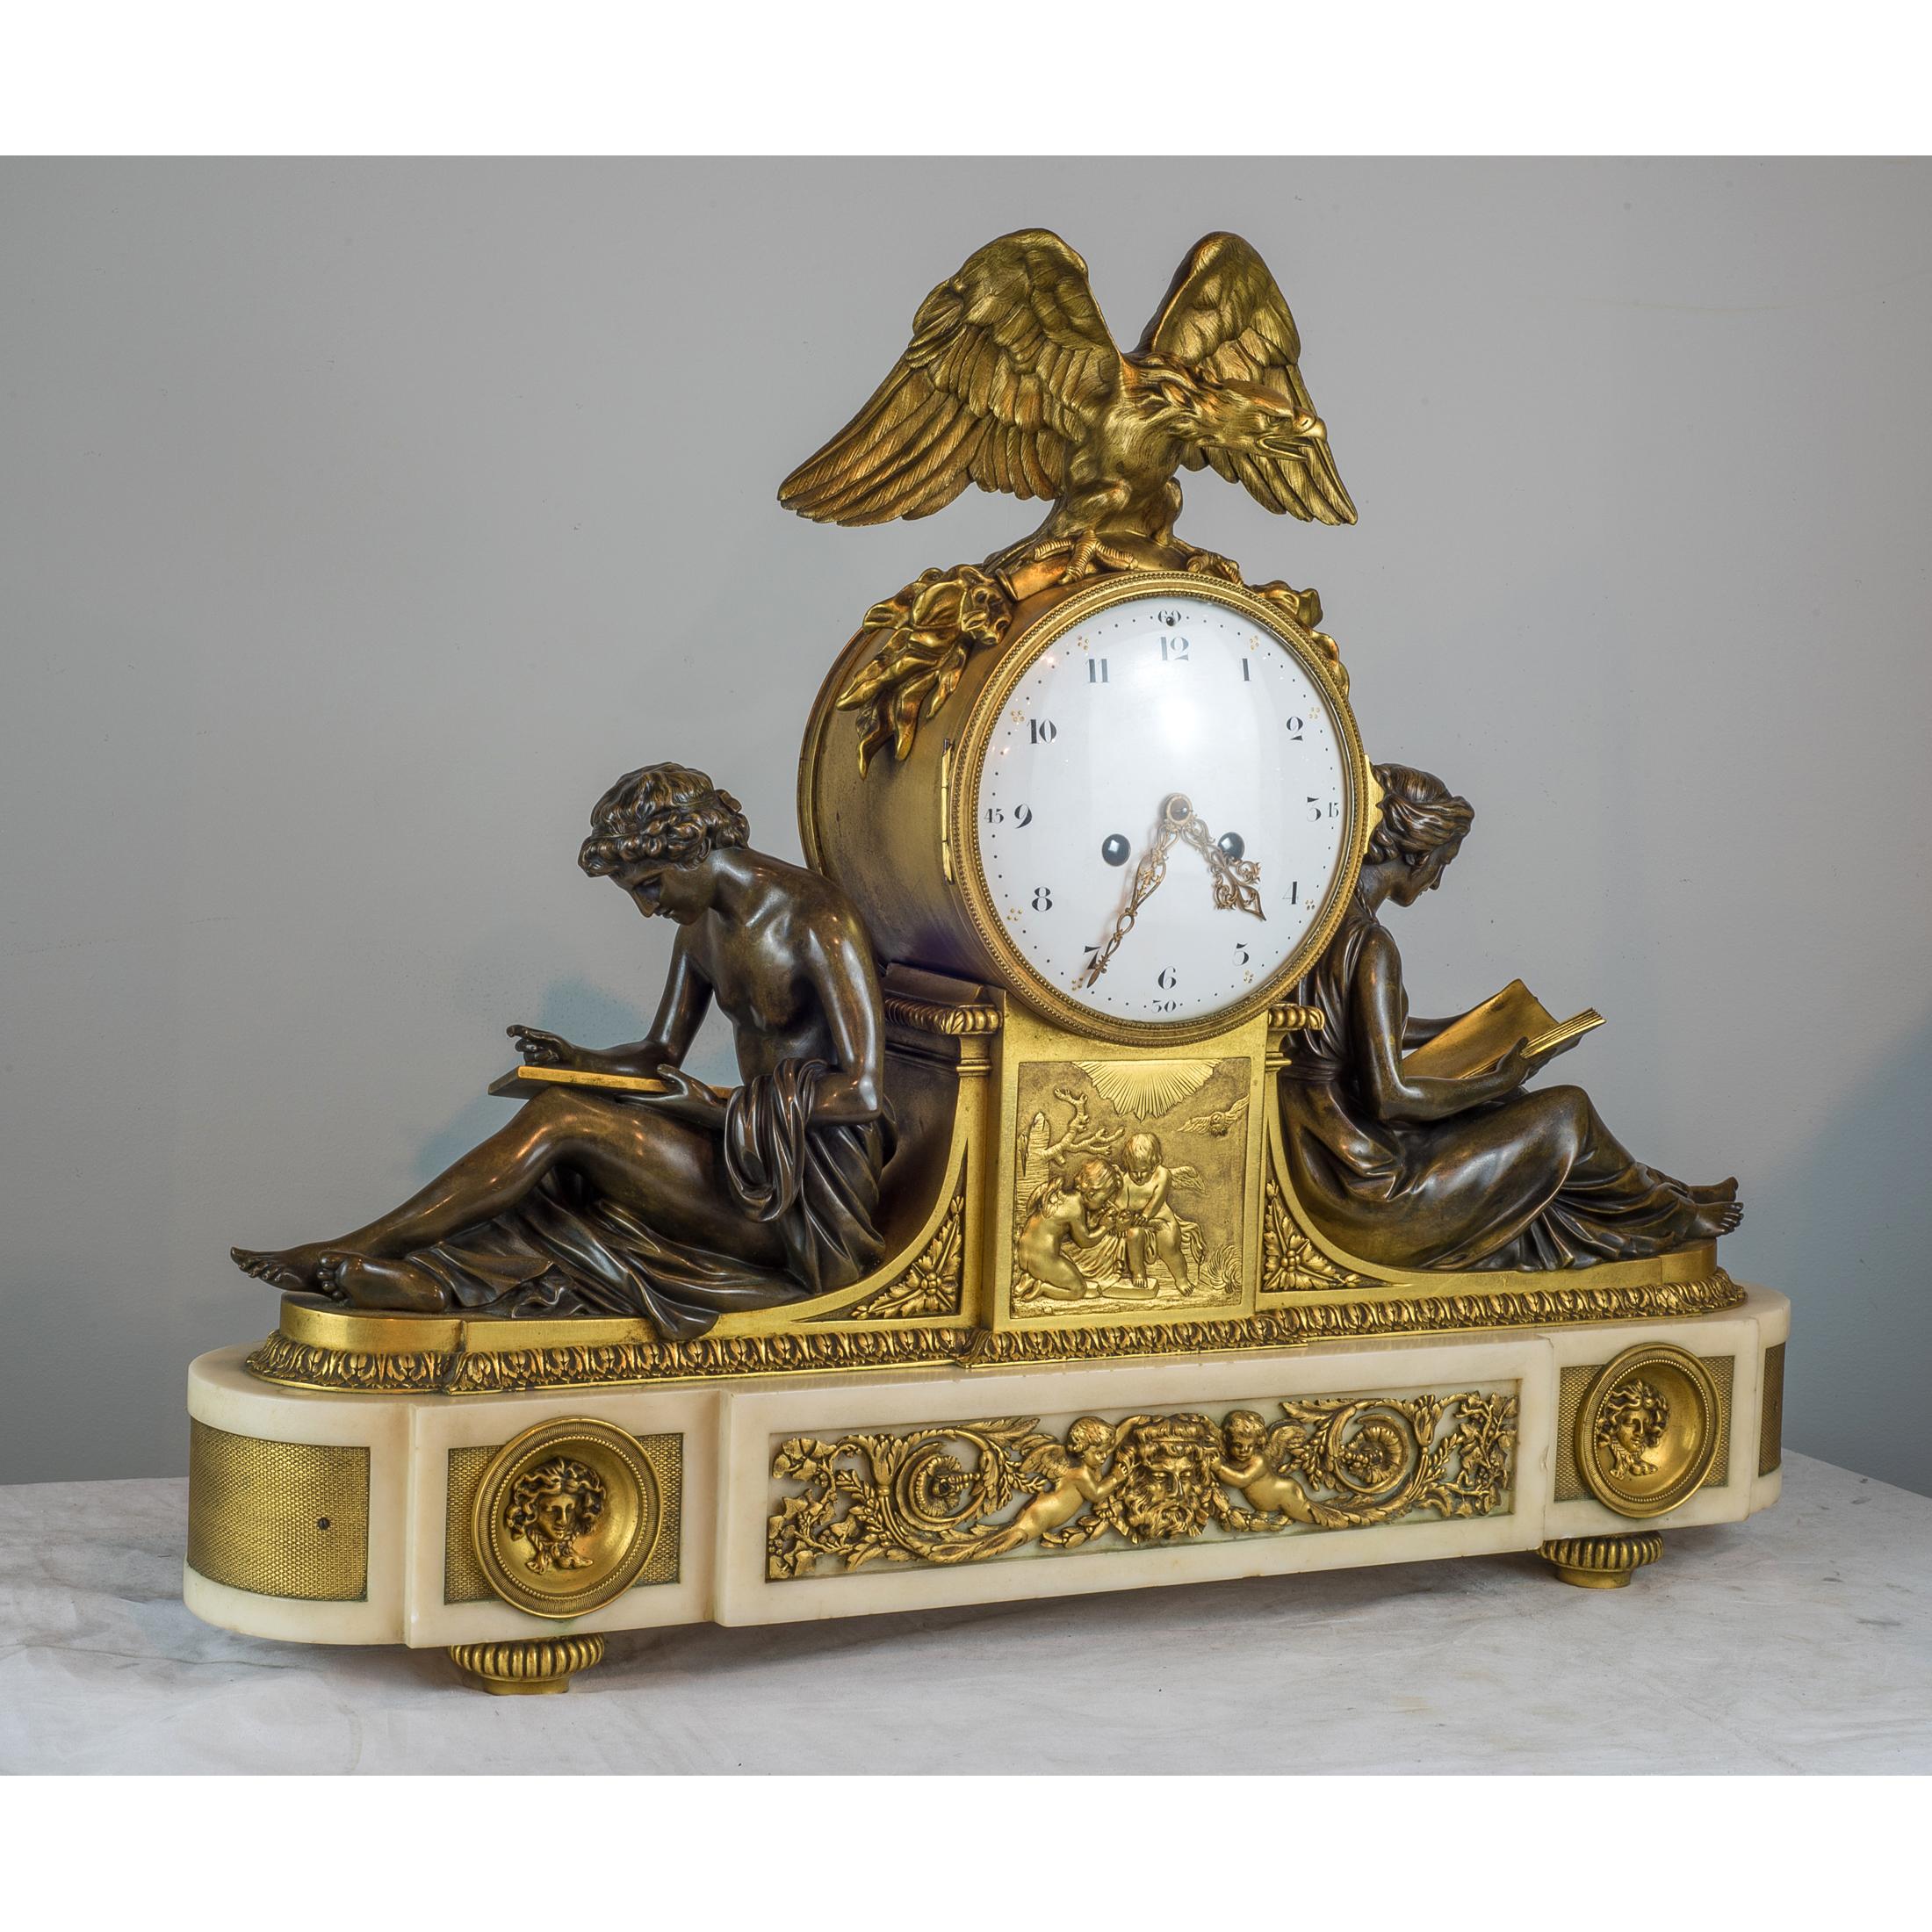 A fine quality gilt and patinated bronze library clock surmounted on a white oblong base. Having a gilt bronze eagle finial in full relief above a circular clock face with Arabic numerals. The clock face flanked by two classical figures reading and